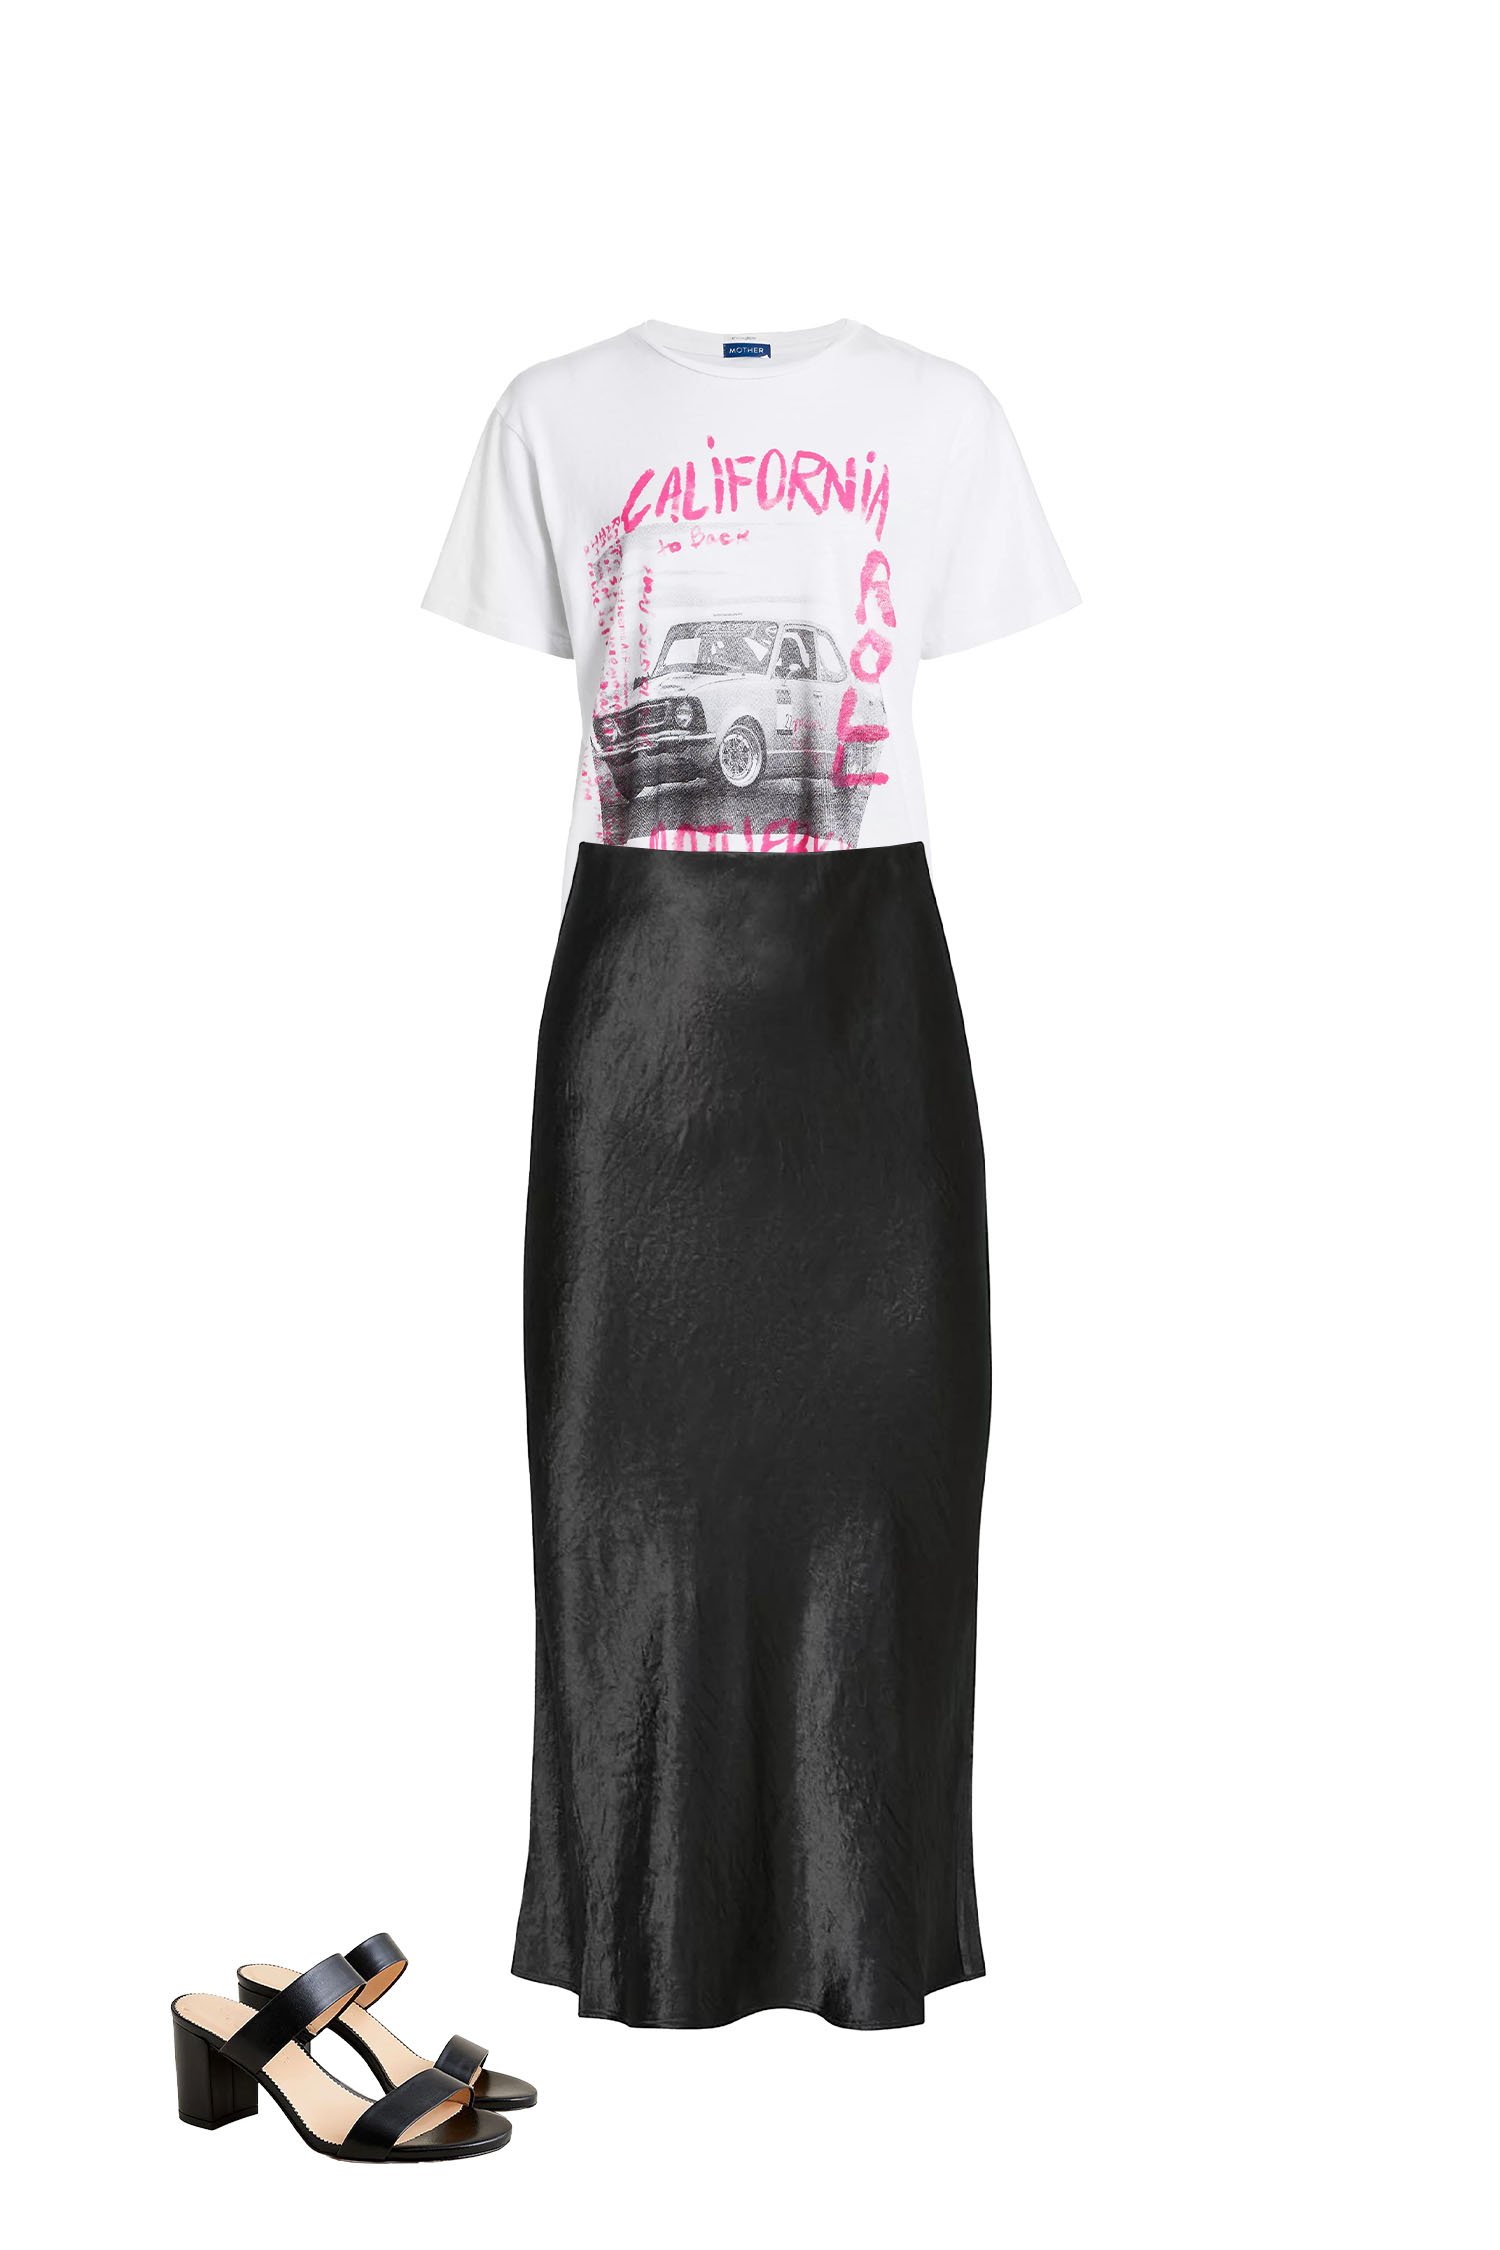 Black Satin Skirt Outfit with White Graphic T-Shirt, and Black Heeled Sandals